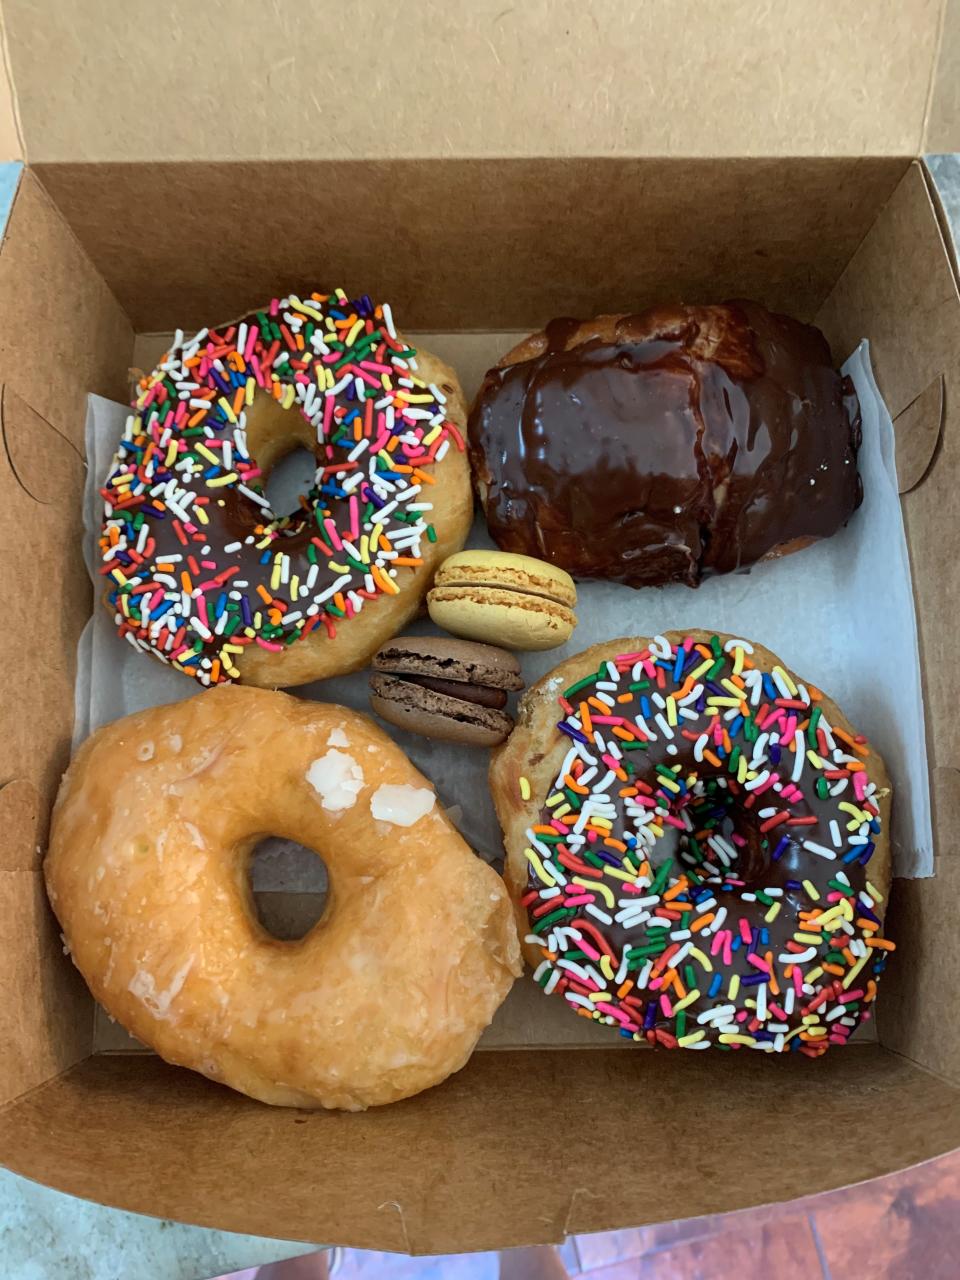 The Boston cream doughnut (top right) from Waretown Bakery is not to be missed.